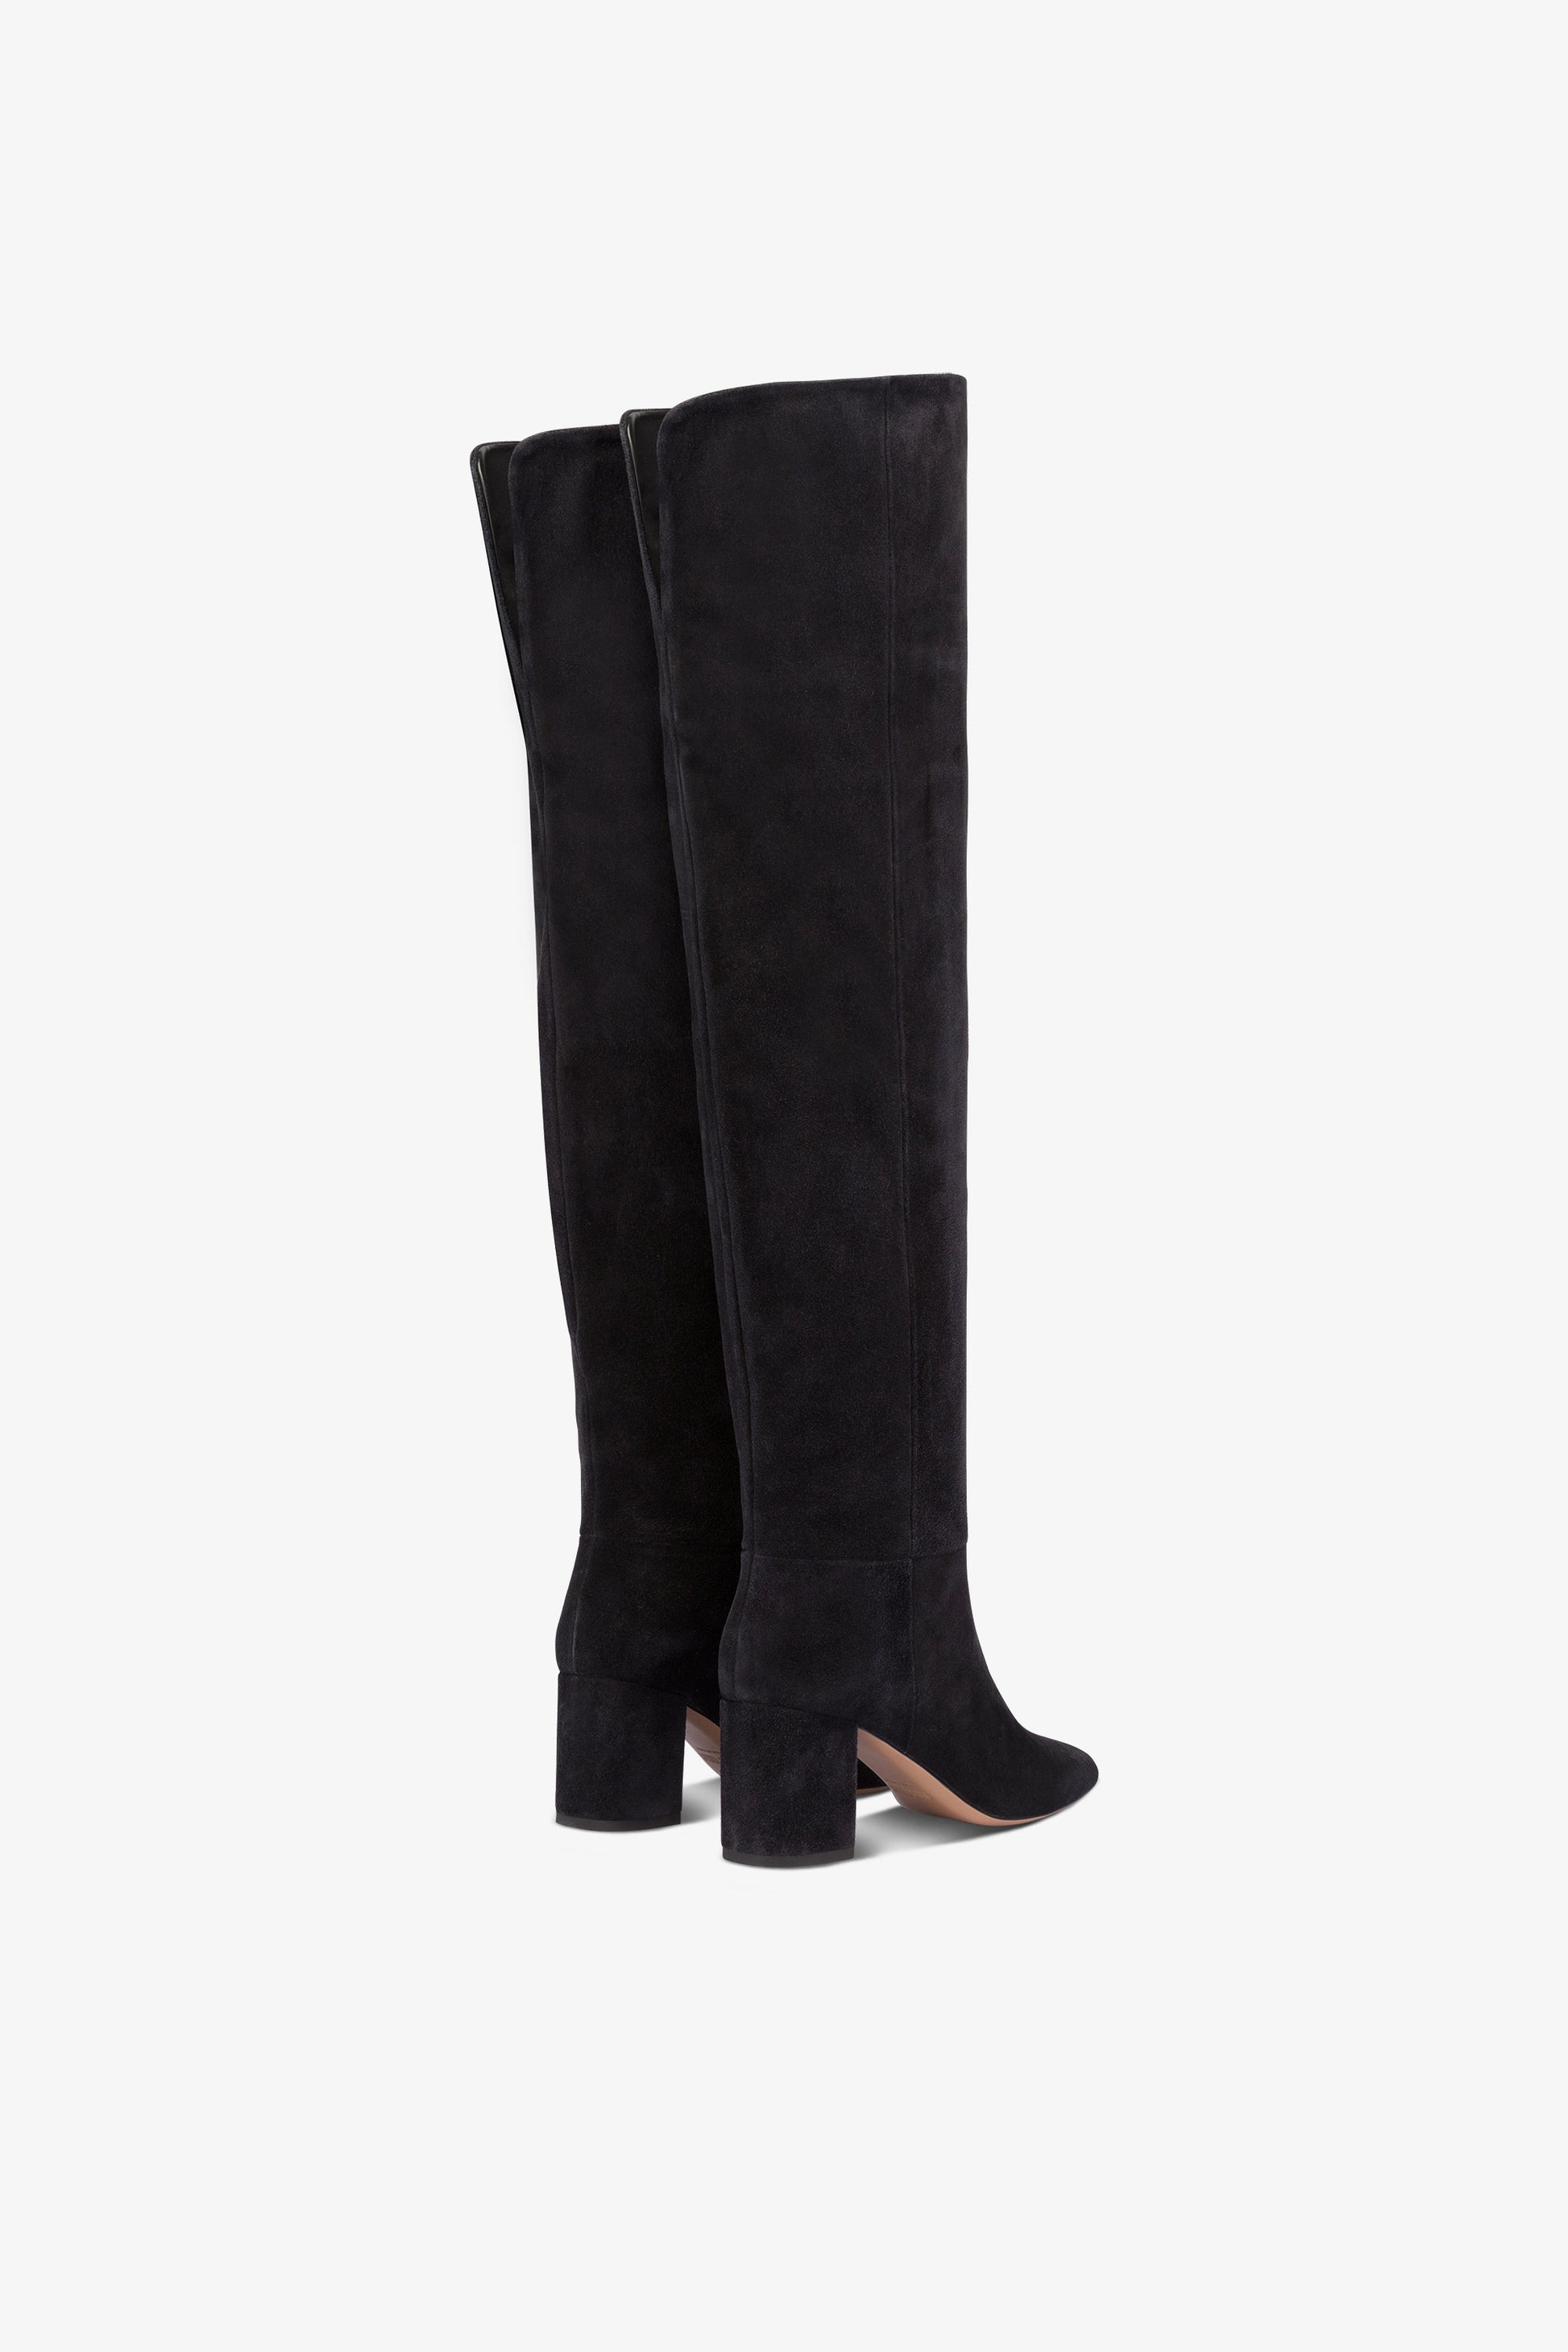 Over-the-knee, long, pointed boots in off-black suede leather